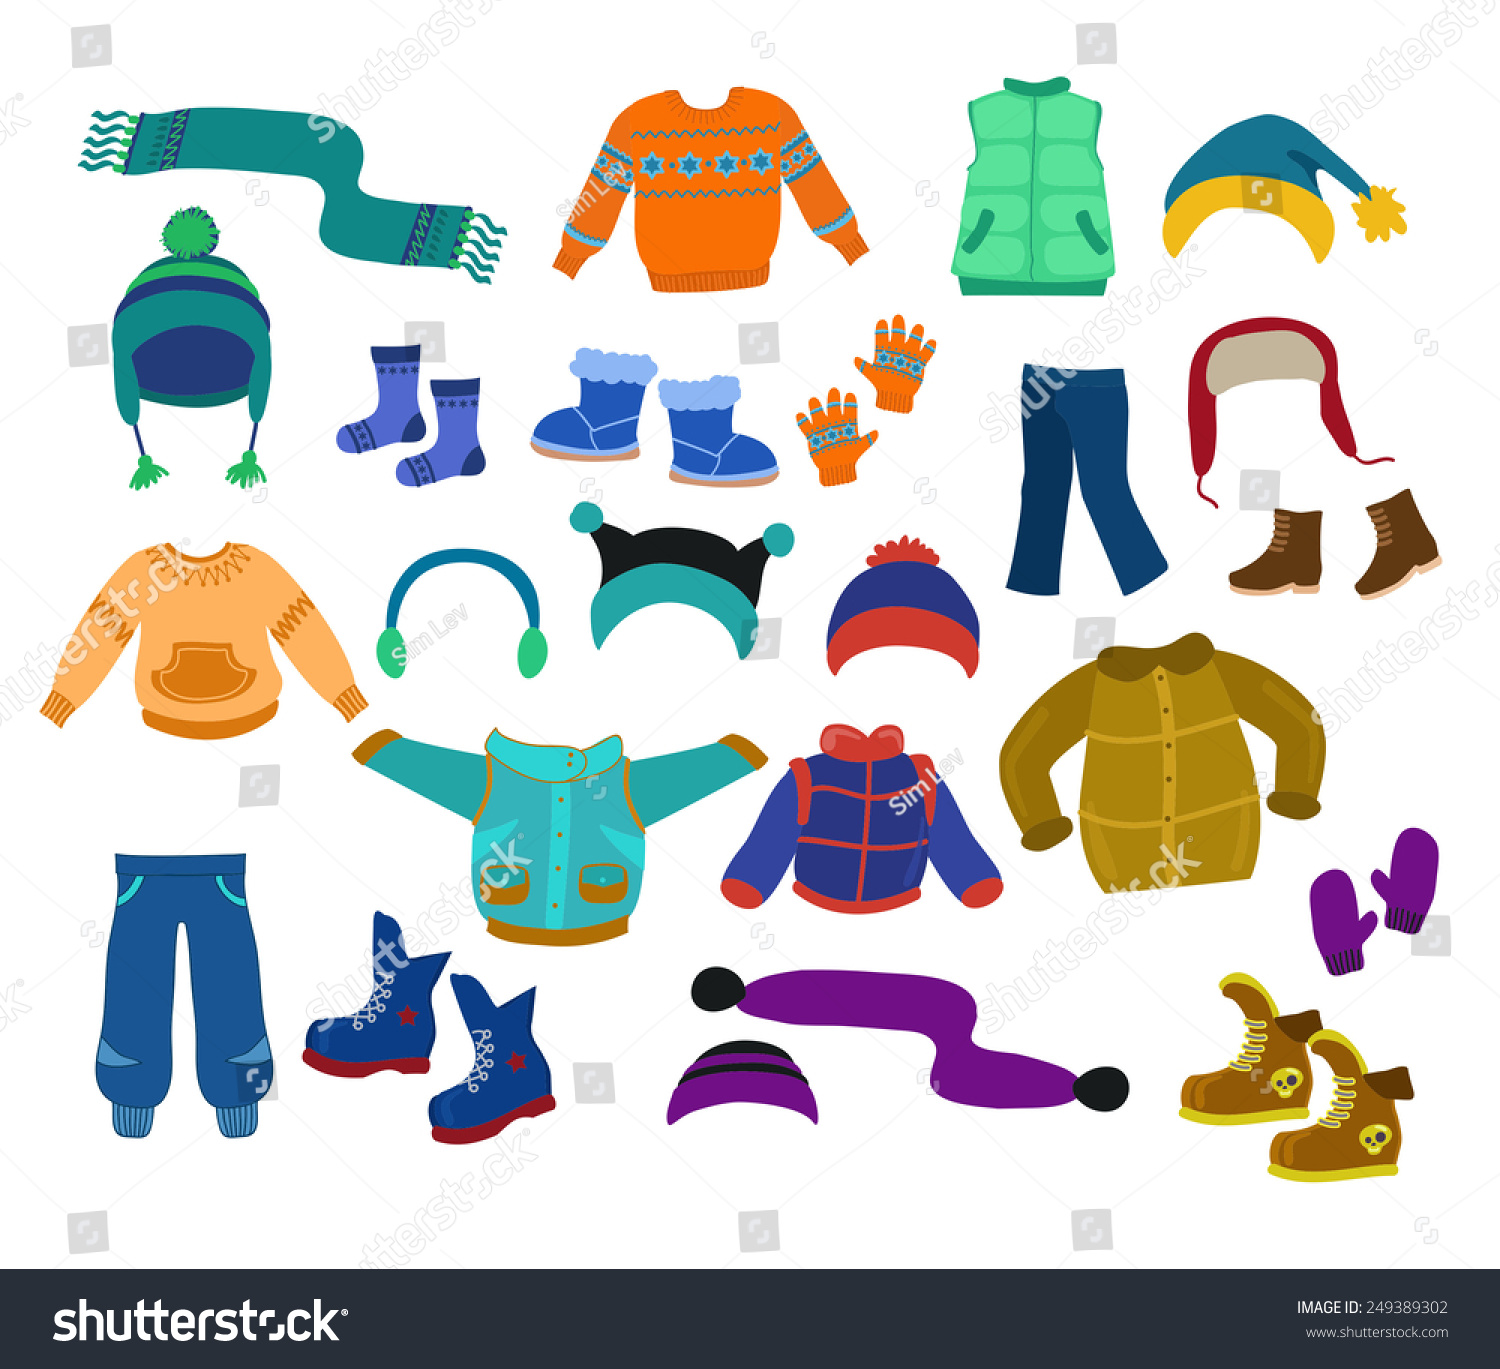 6,230 Winter clothing clipart Images, Stock Photos & Vectors | Shutterstock